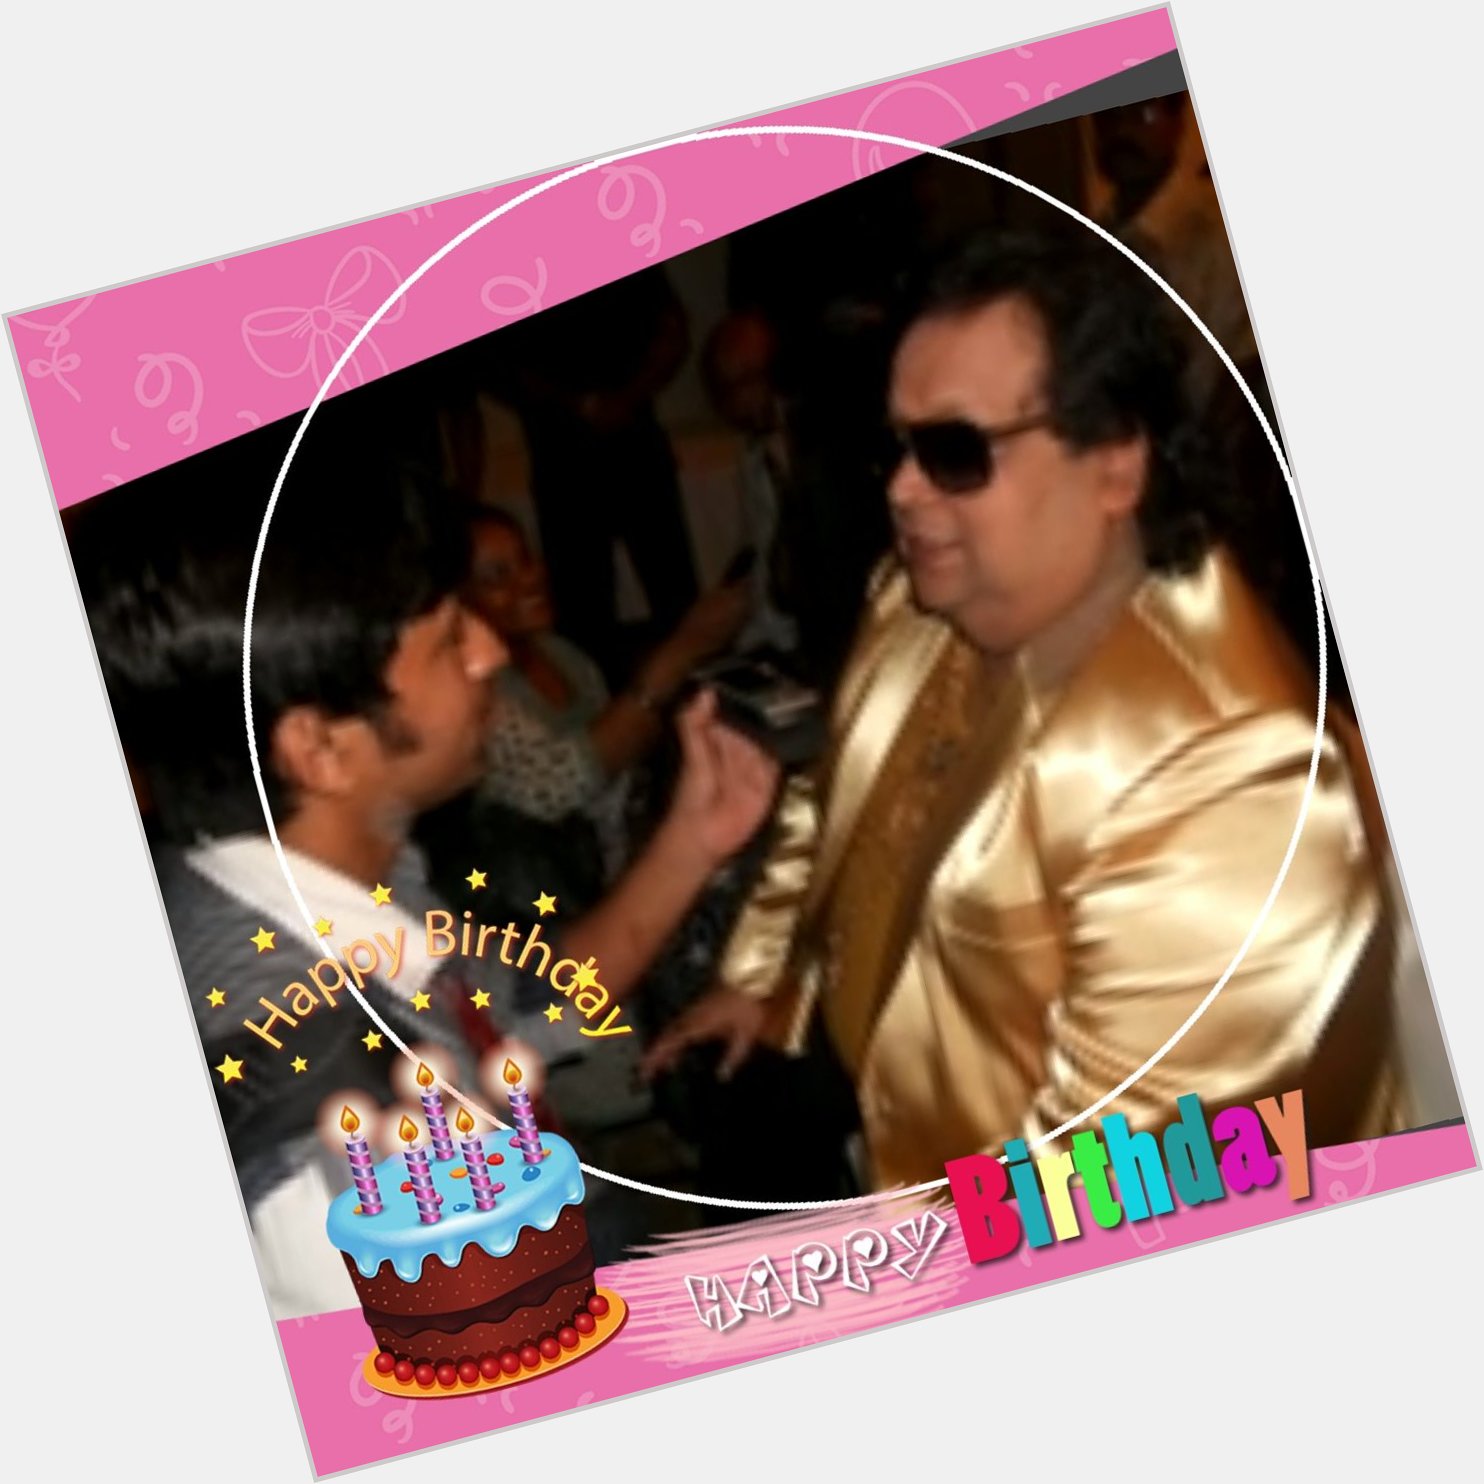  Happy Birthday to the King of melody Bappi Lahiri.
Wish you all the very best in life. 